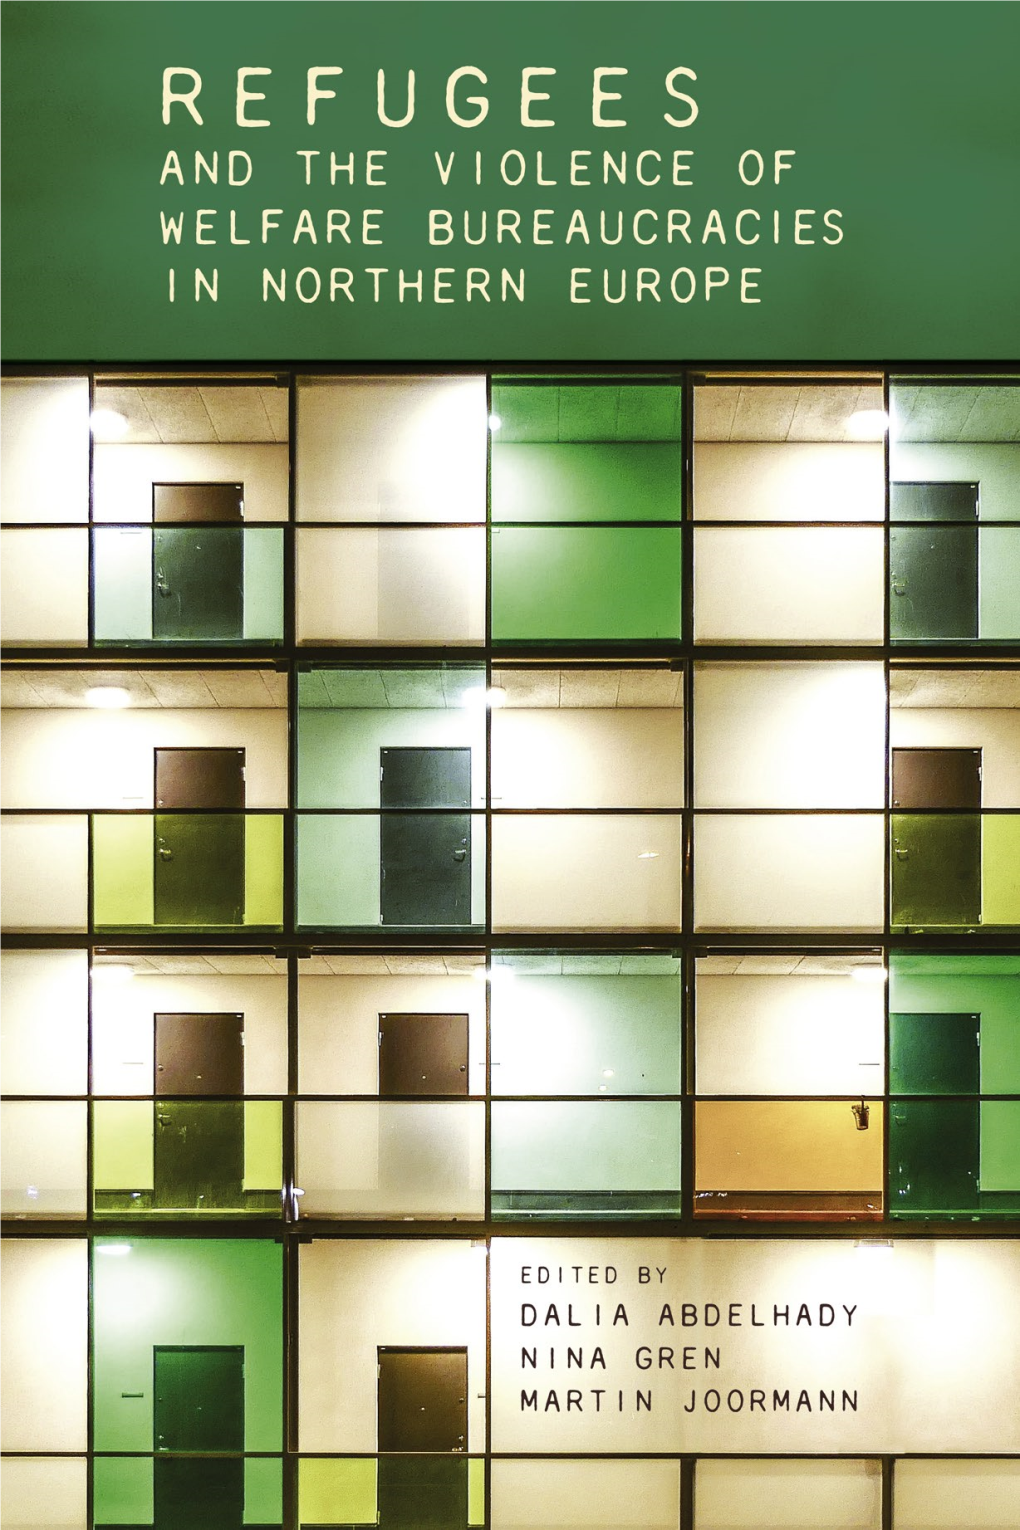 Refugees and the Violence of Welfare Bureaucracies in Northern Europe